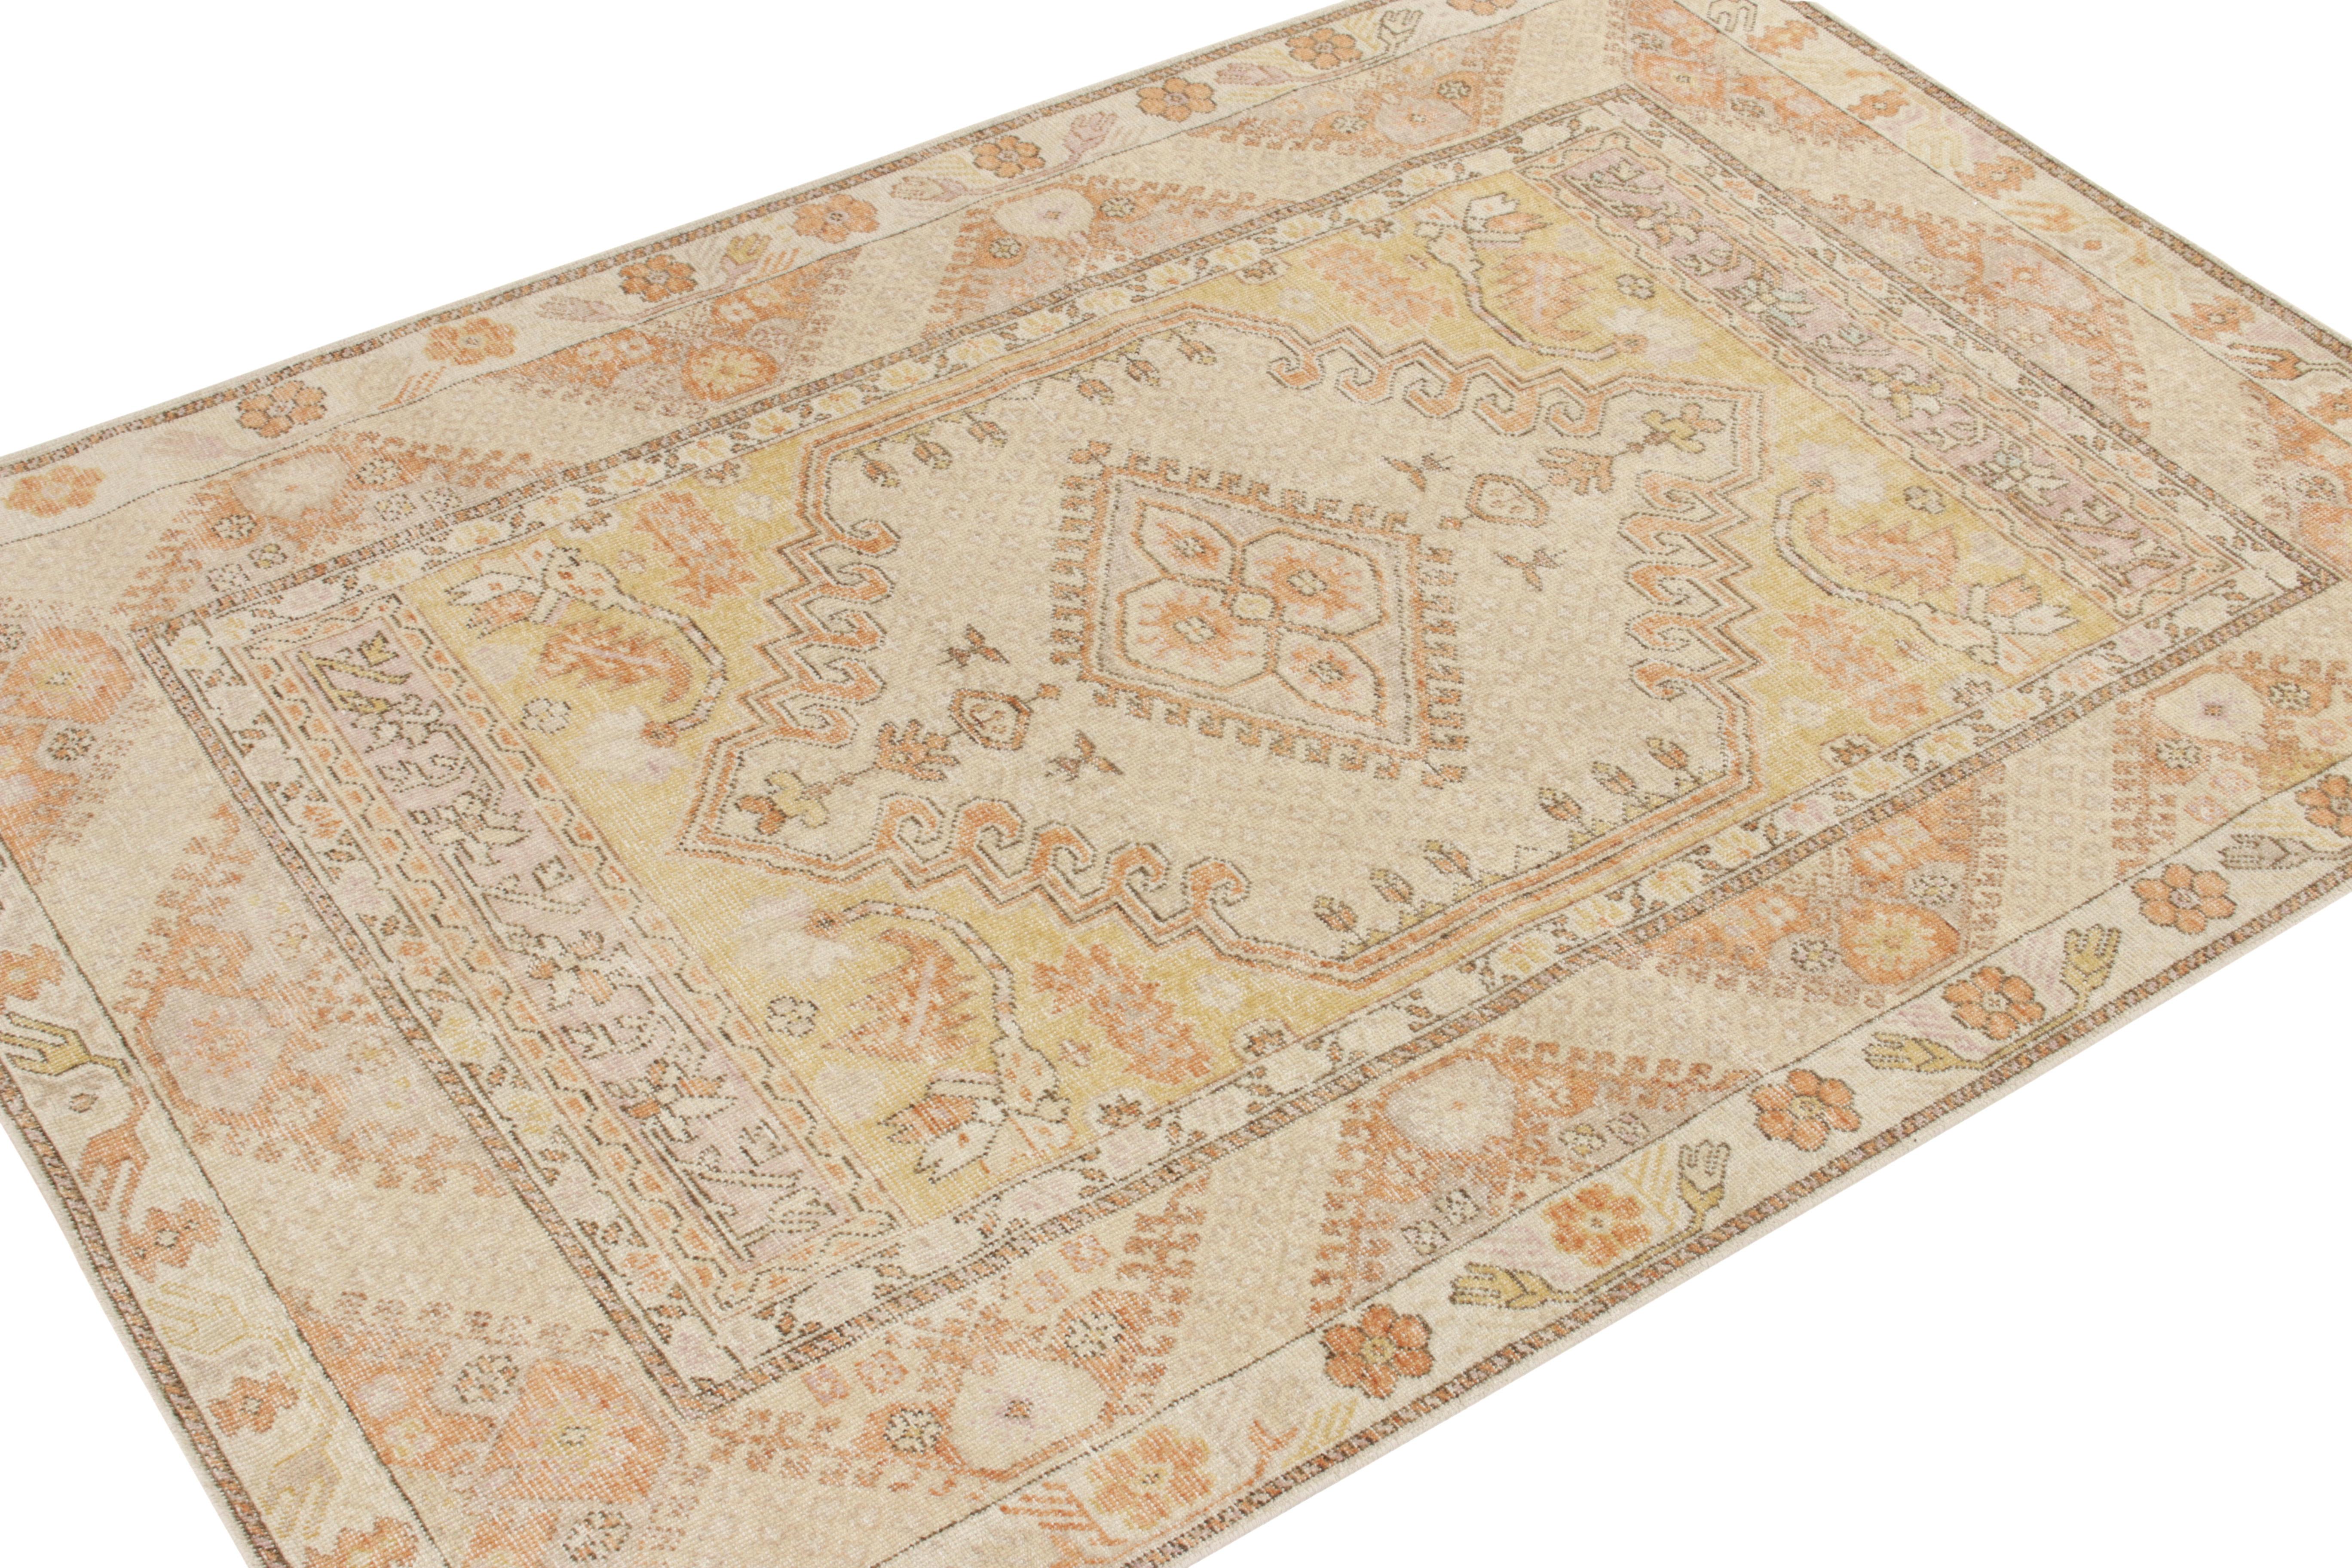 Tribal Rug & Kilim's Distressed Classic Style Rug in Cream, Orange Medallion Pattern For Sale